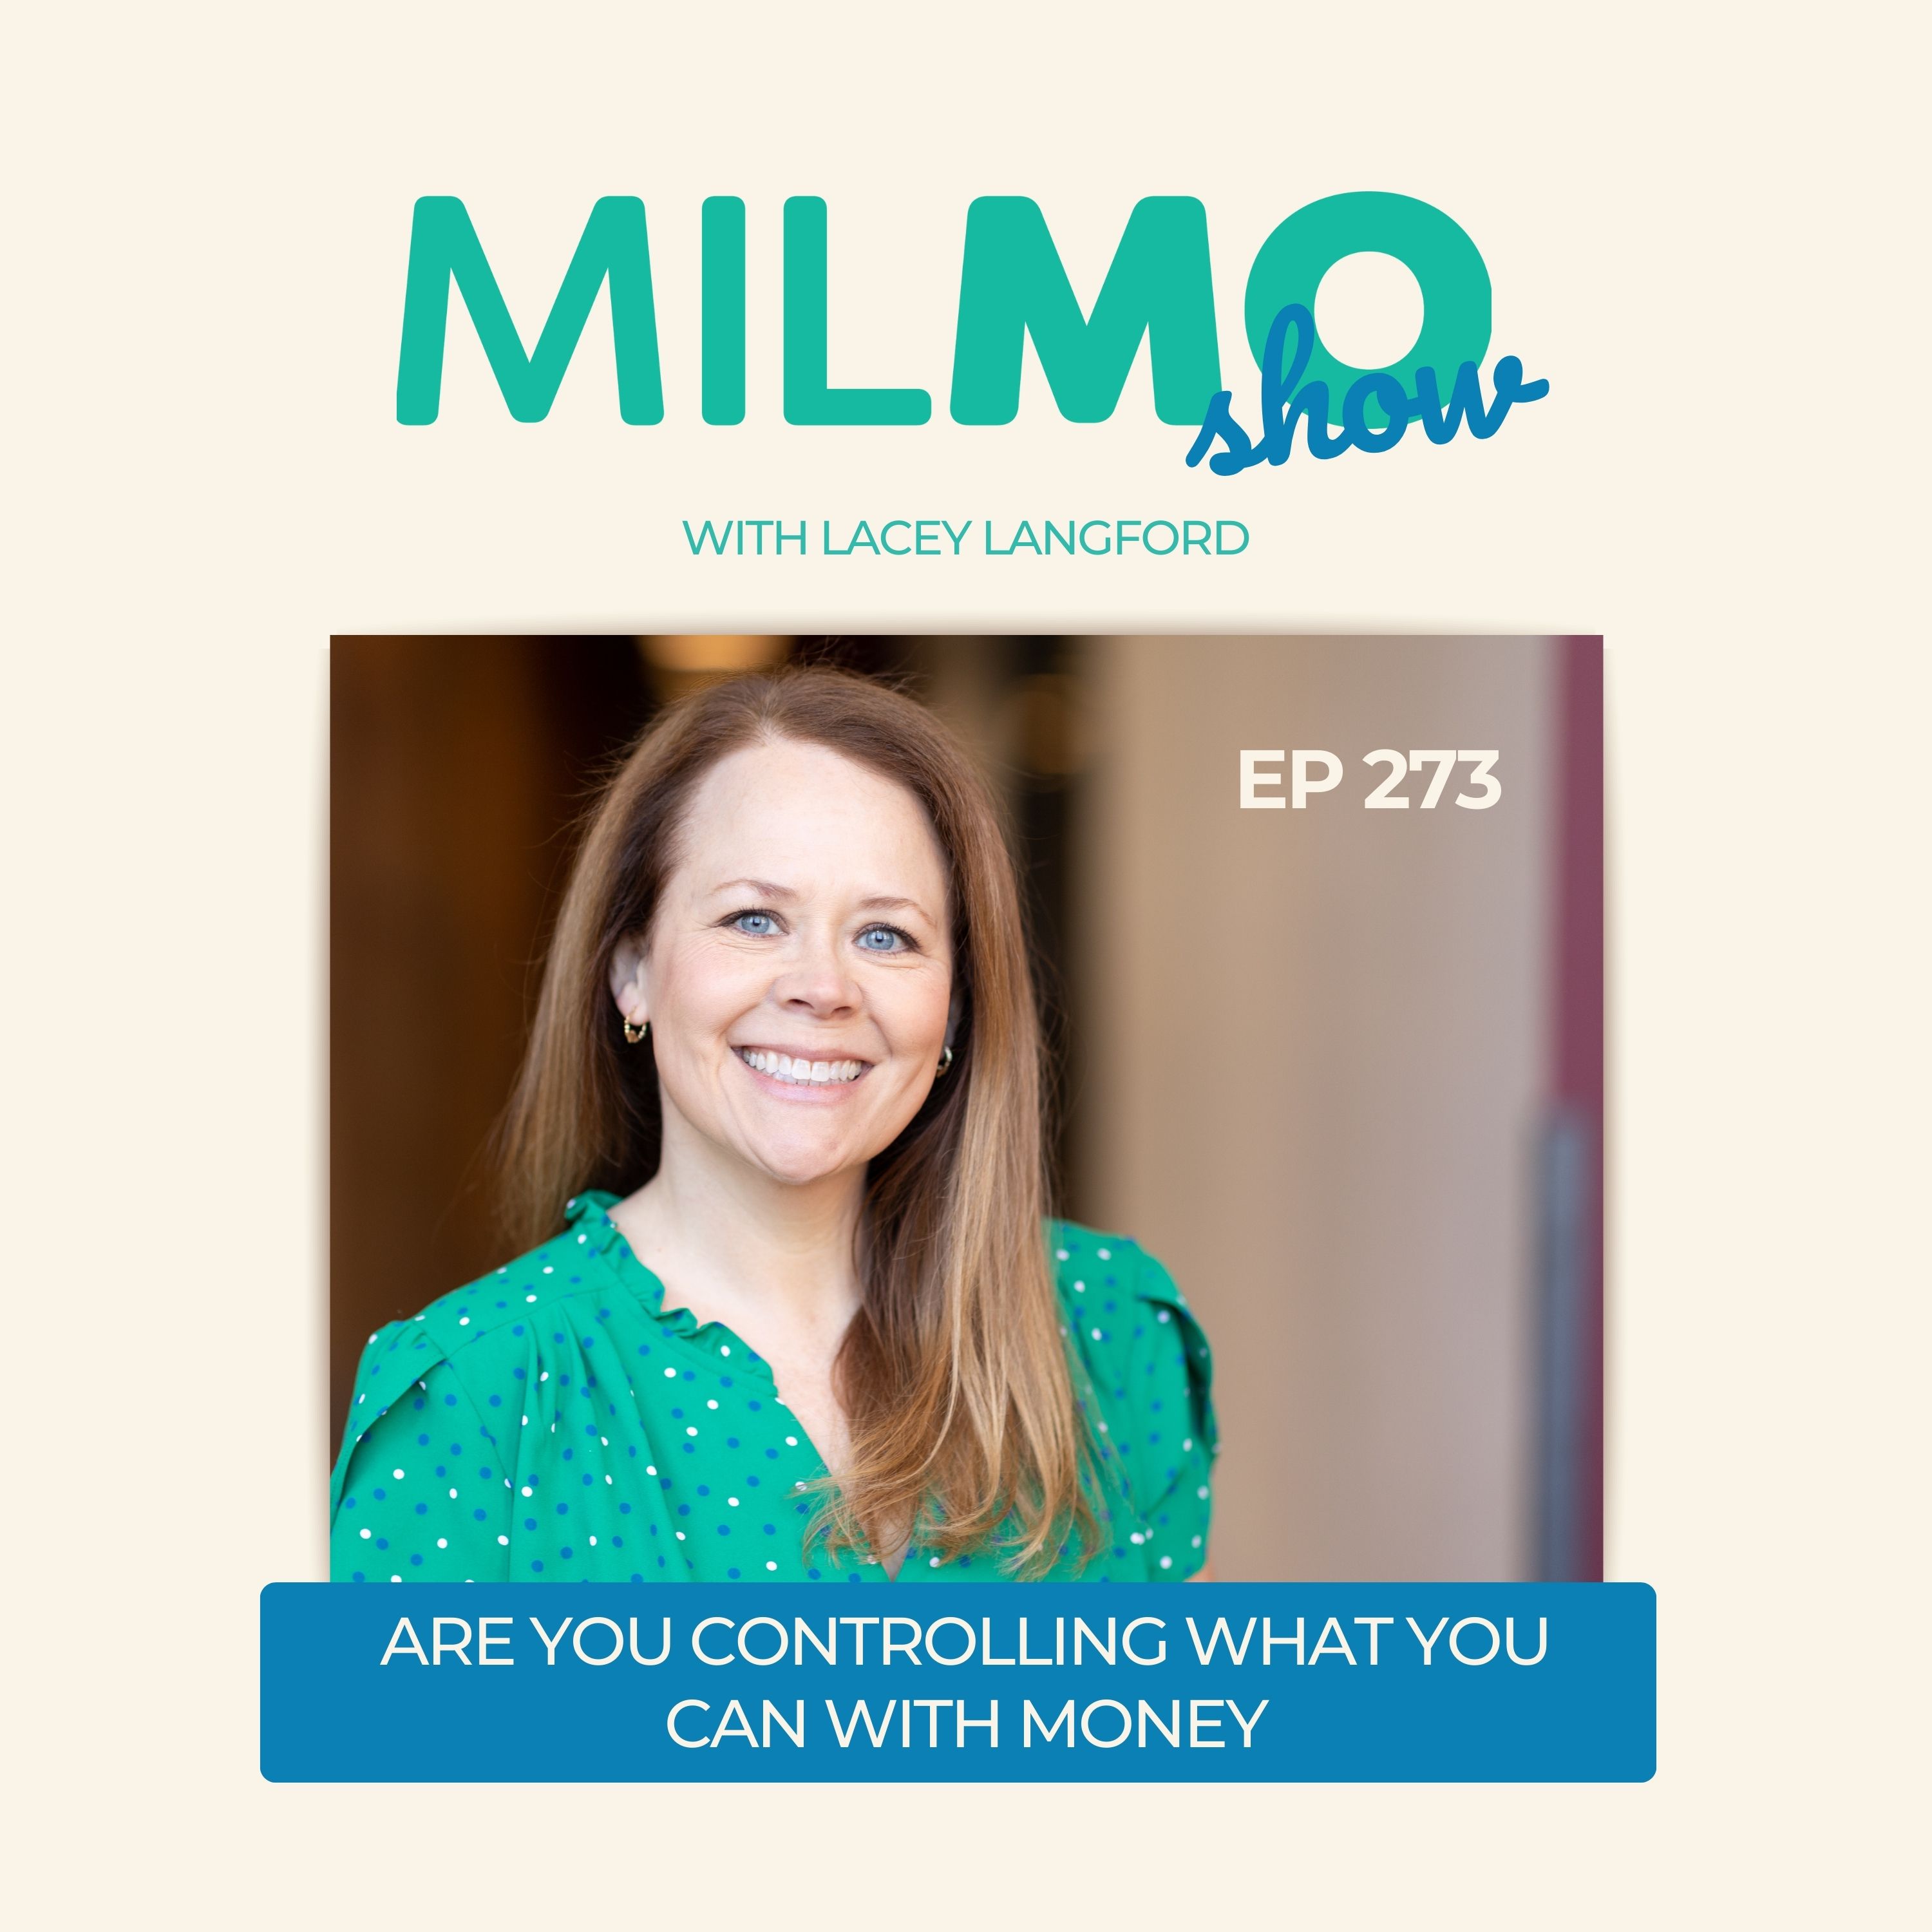 Gain control over your finances by focusing on what you can influence. This podcast covers the key areas you have power over to reach money goals: earning, spending, saving, time management, and mindset.